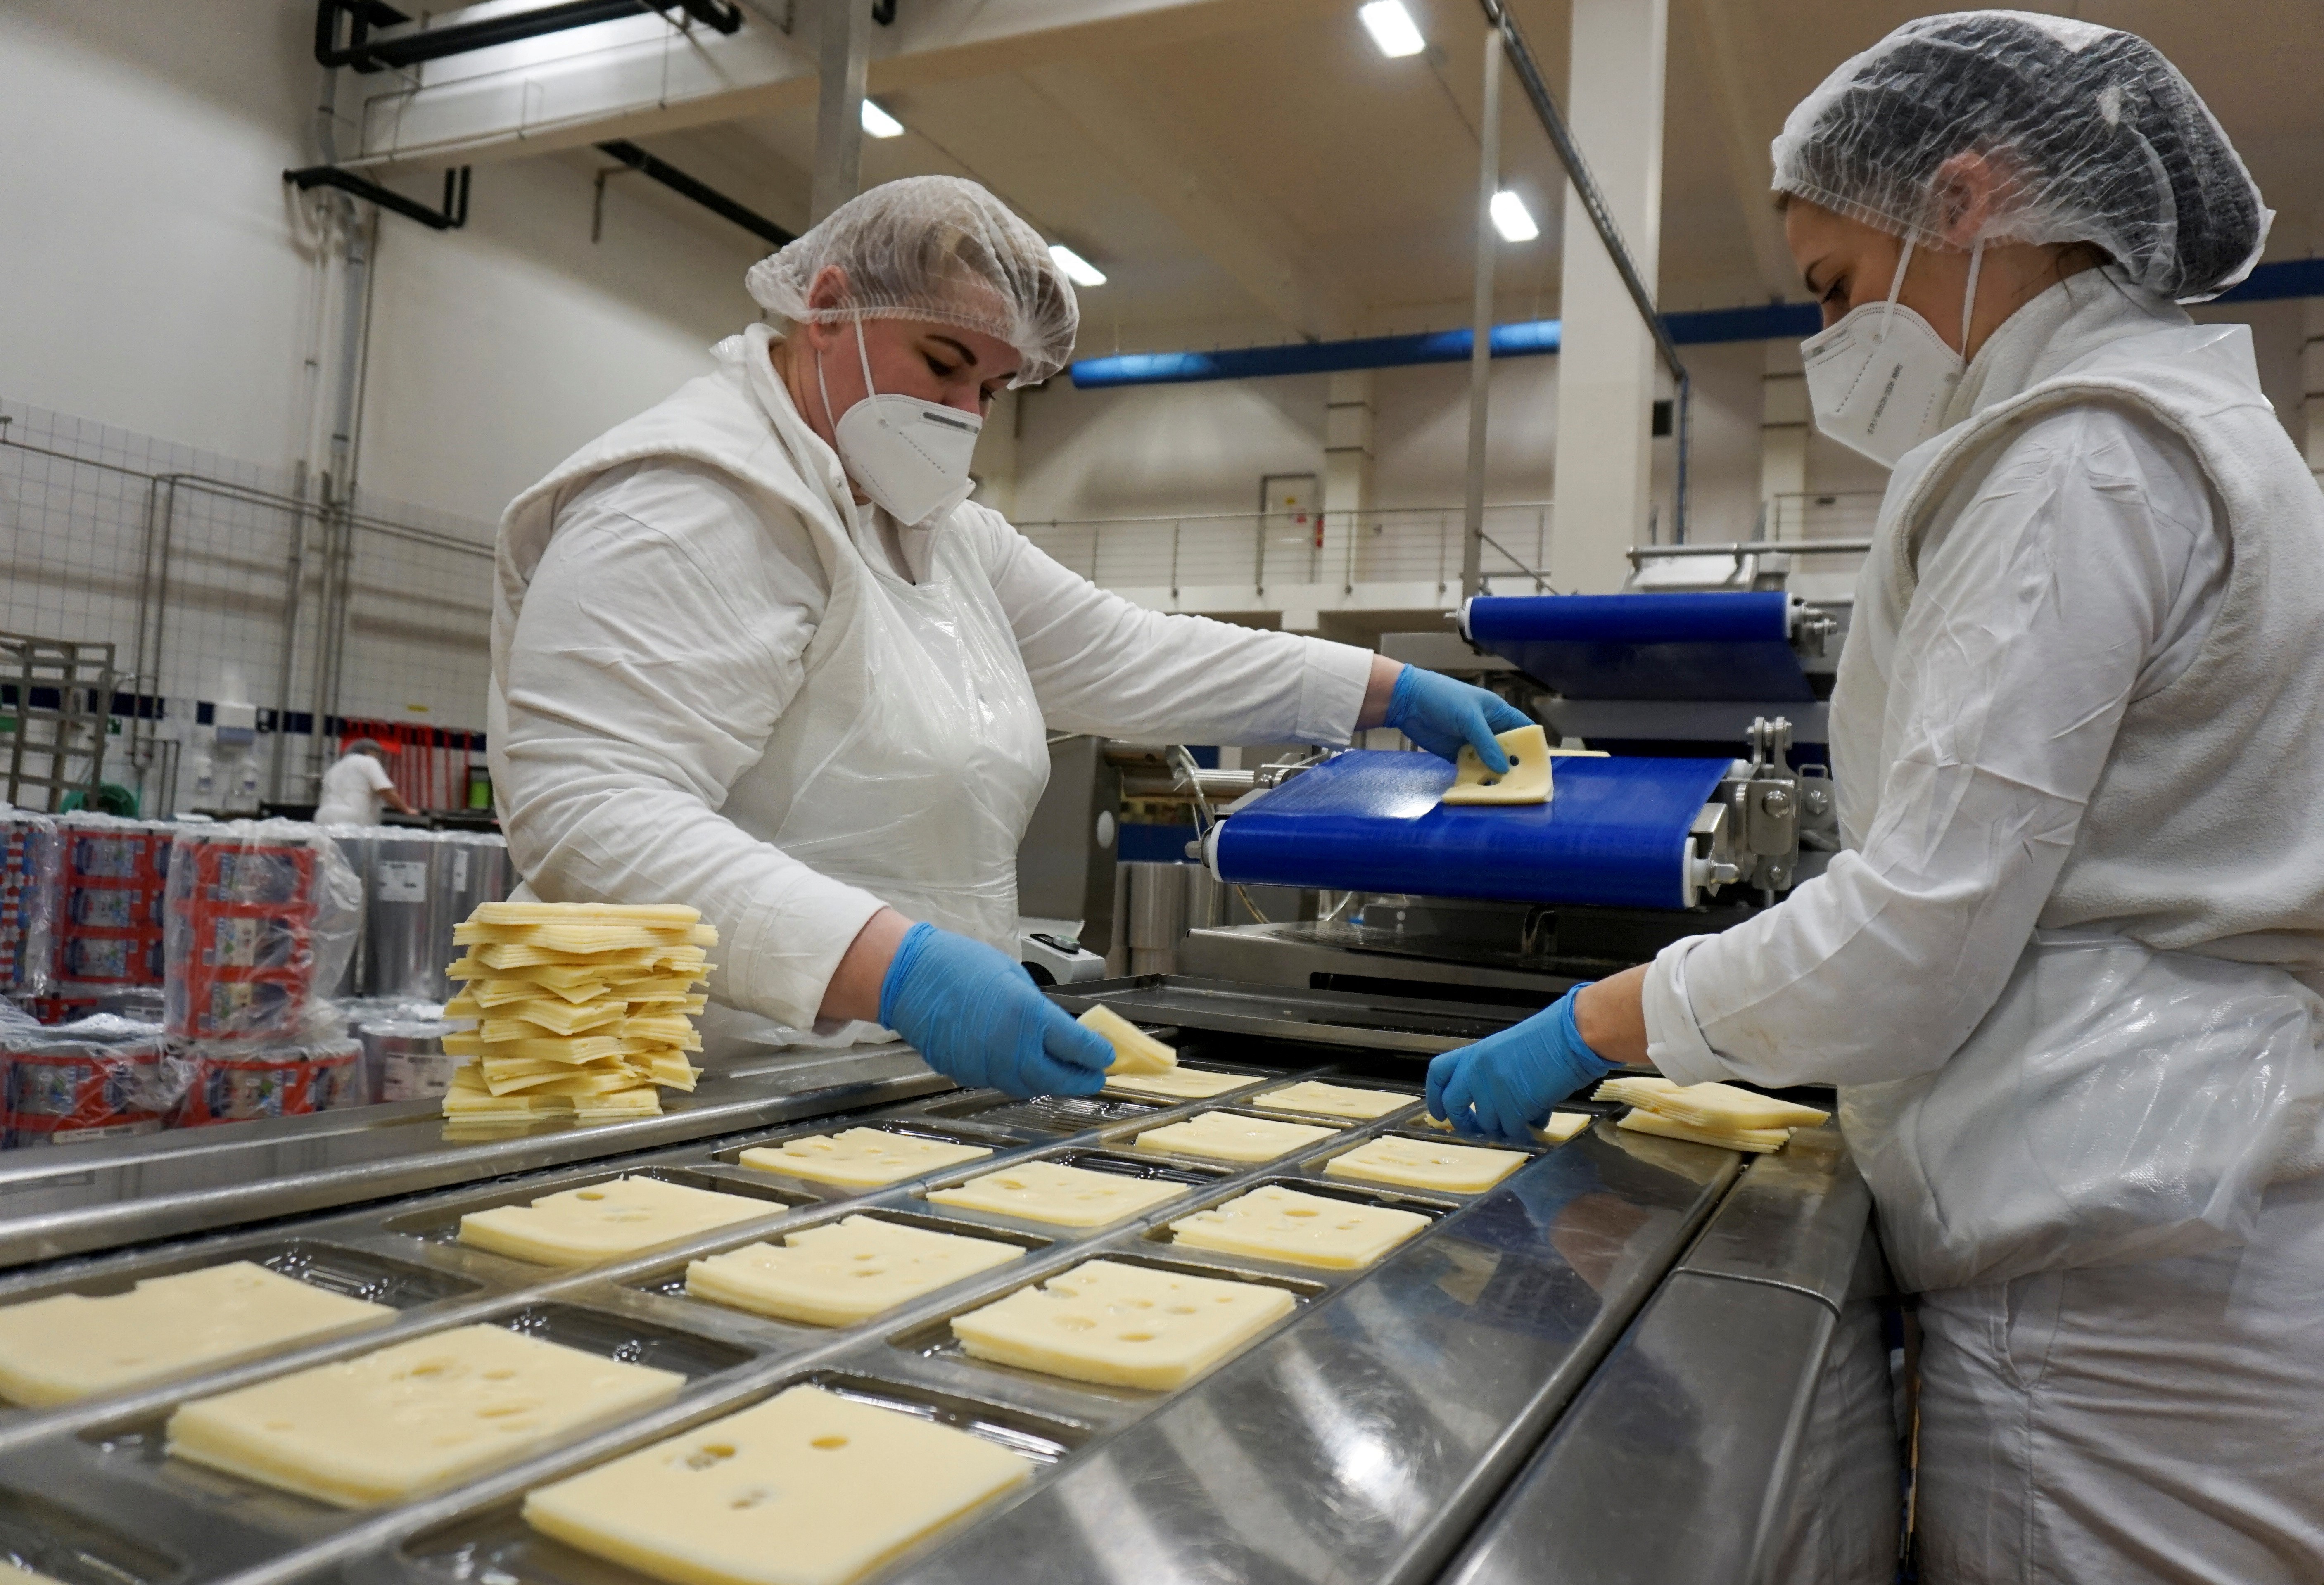 Employees work at Madeta dairy factory in the town of Plana nad Luznici, Czech Republic, January 24, 2022. Photo: Reuters